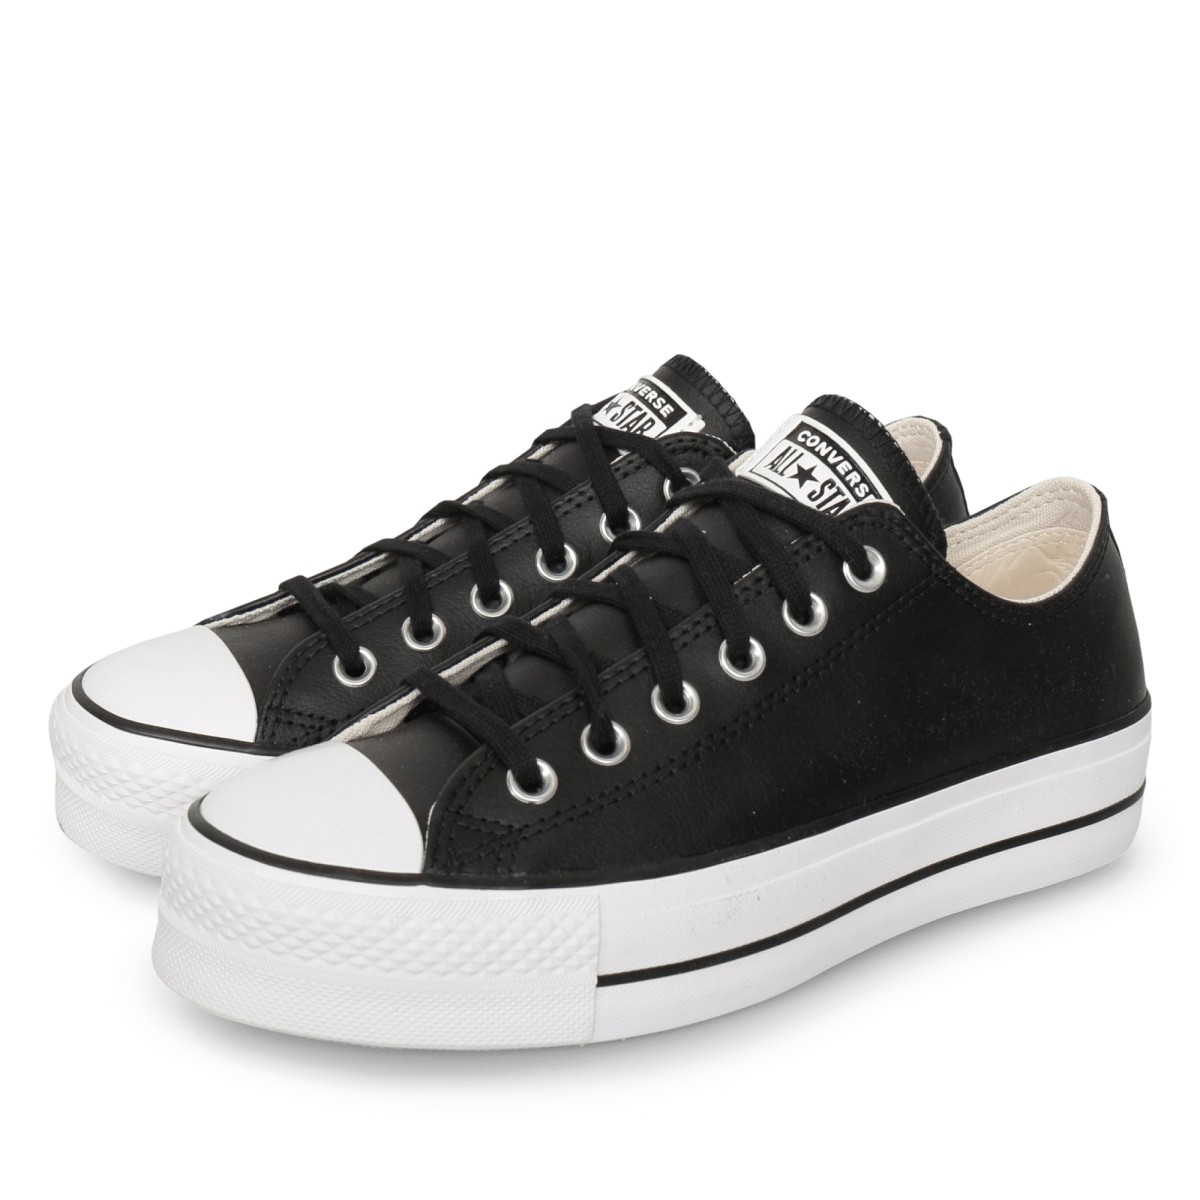 Converse Chuck Taylor All Star Clean Leather